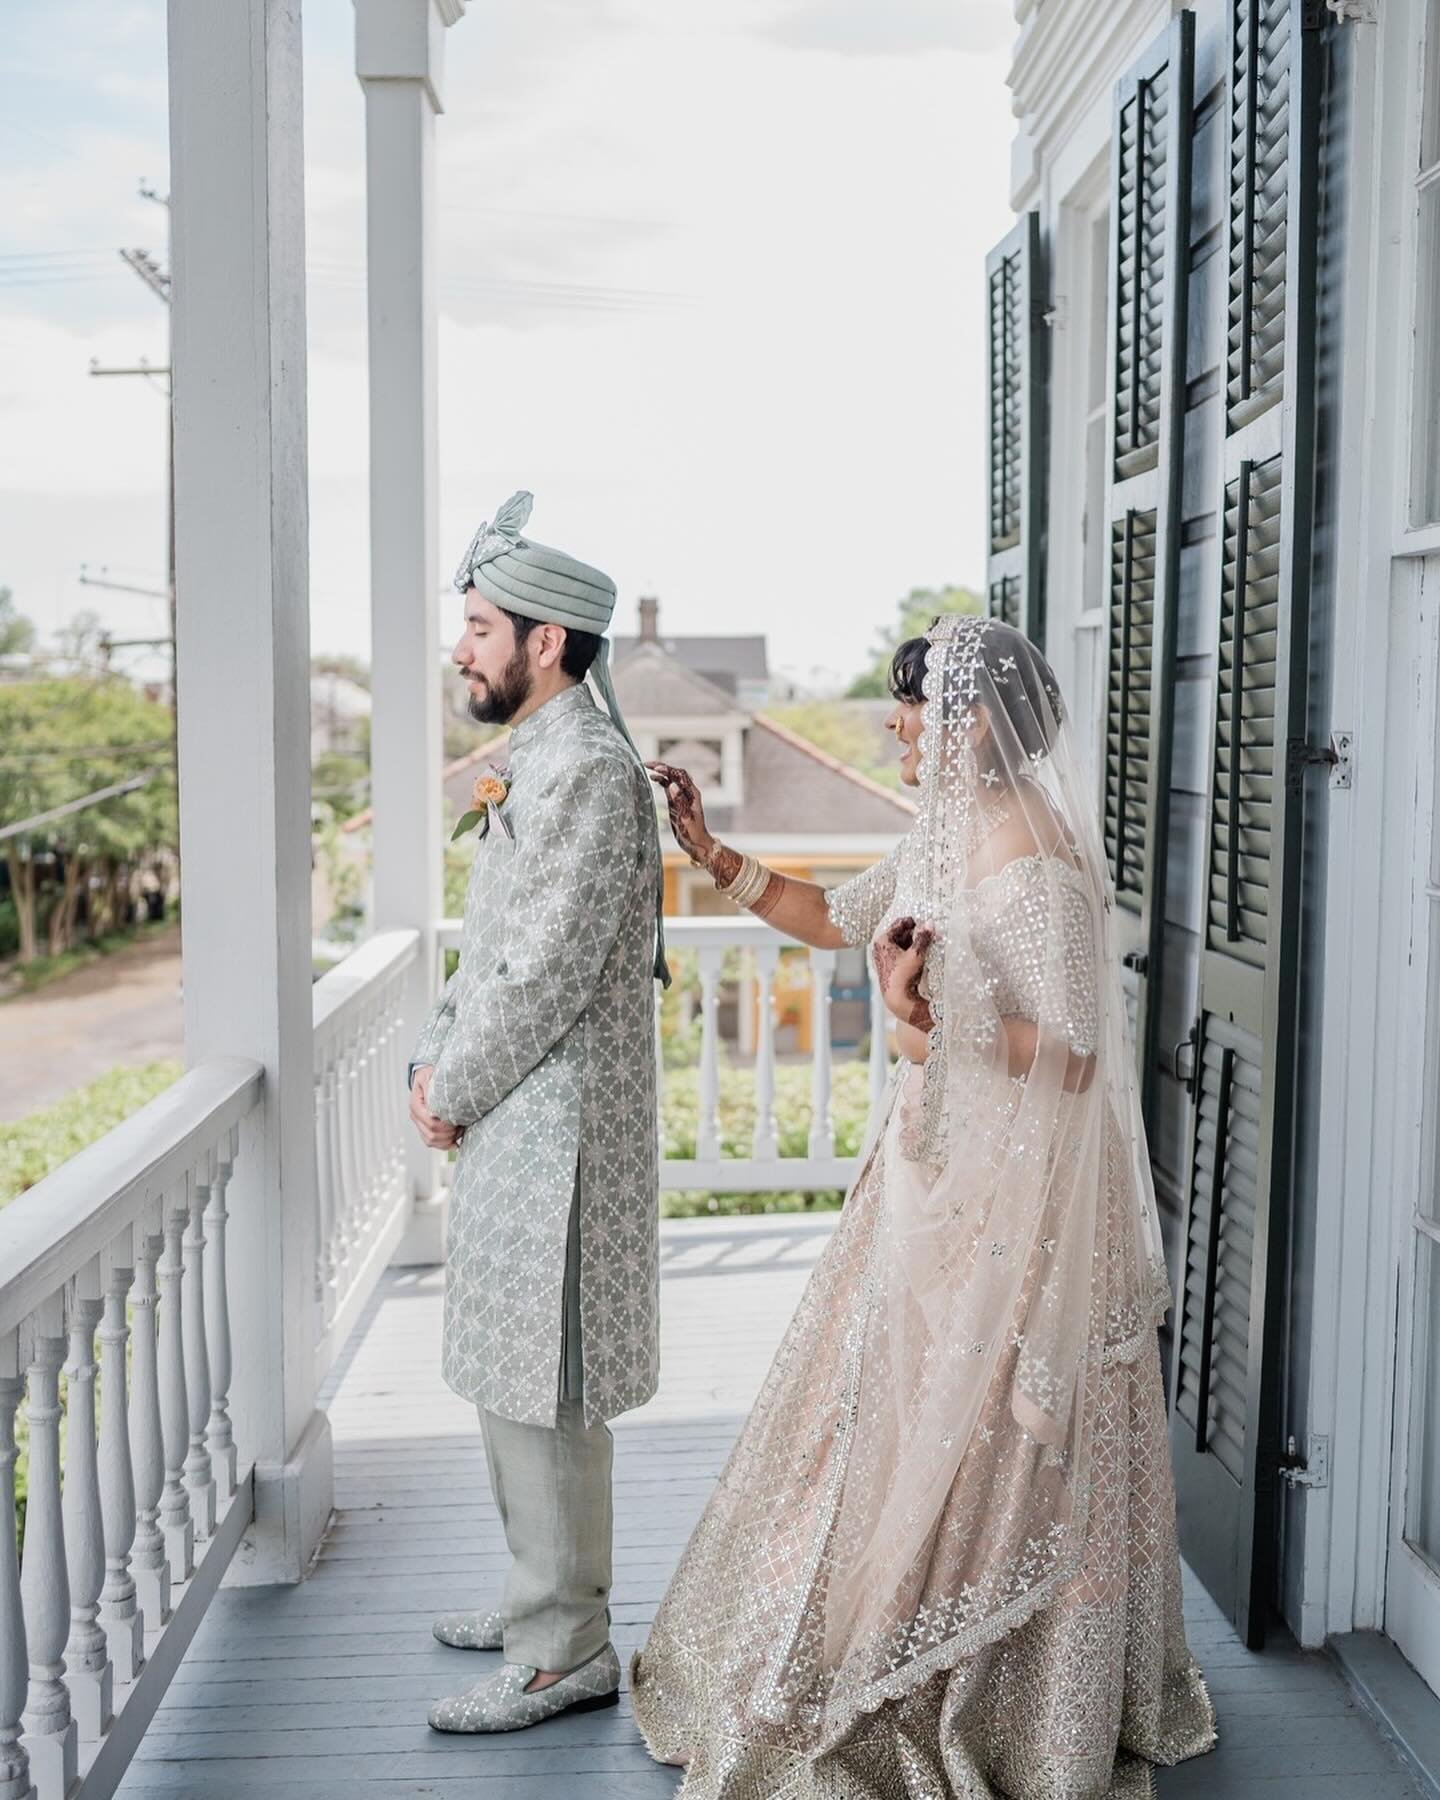 First Looks are always sweet moments! 
⠀⠀⠀⠀⠀⠀⠀⠀⠀
🫣 Planning on one for your day? There are a few key logistics that ensure First Looks go smoothly. Hire us or another professional planner to get it right (among other things)!!
⠀⠀⠀⠀⠀⠀⠀⠀⠀
Captured @th